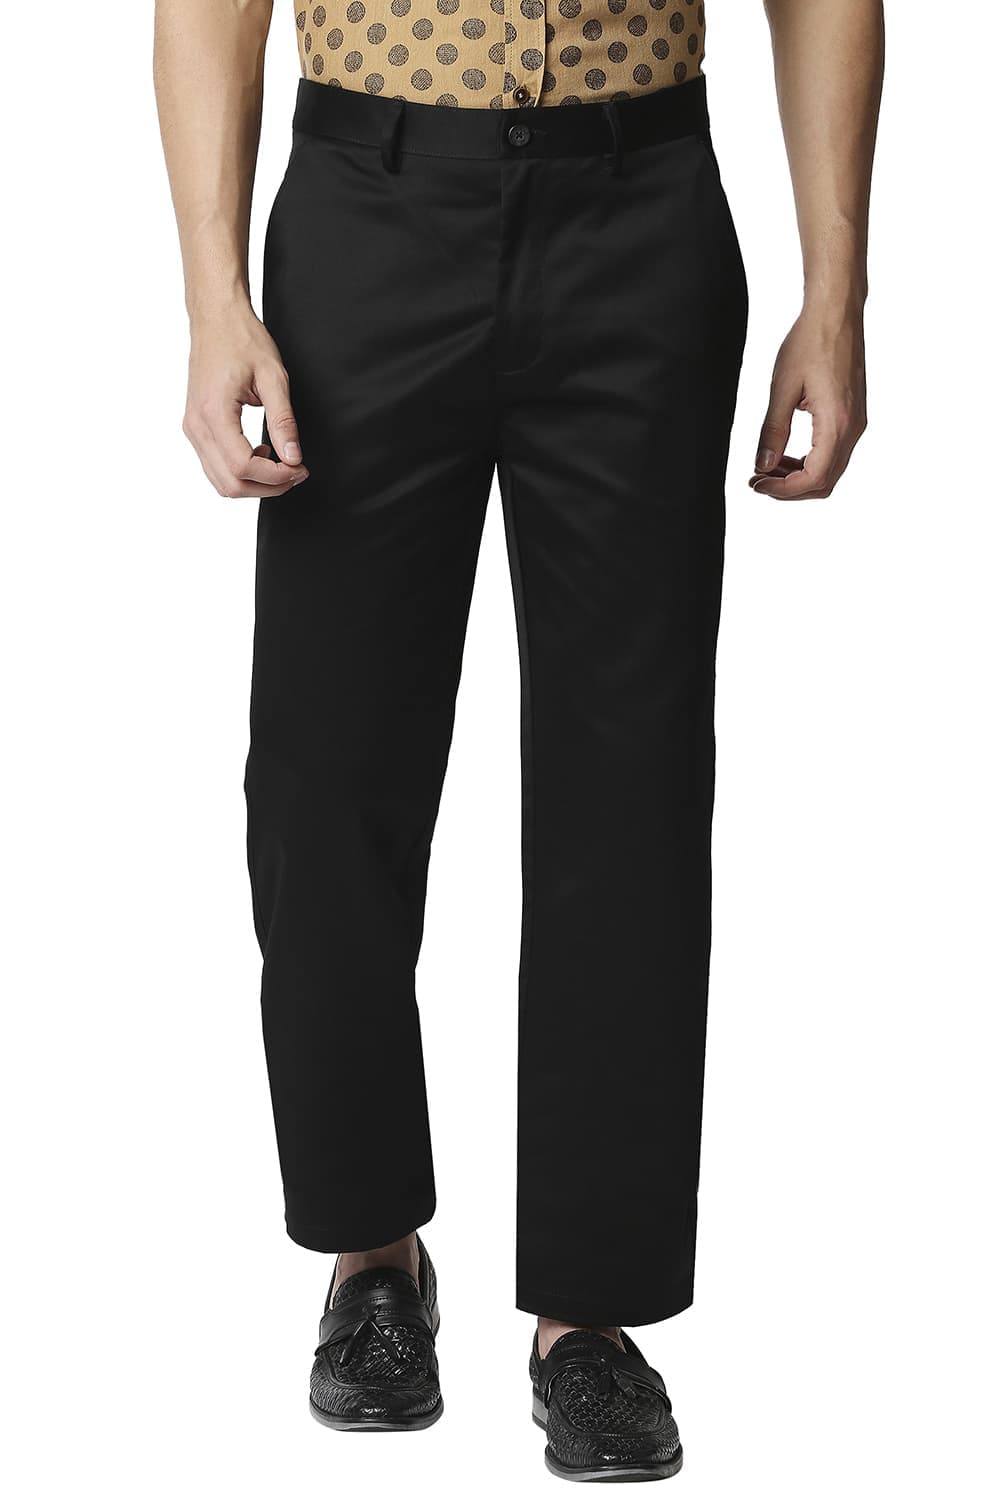 BASICS COMFORT FIT SATIN WEAVE POLY COTTON TROUSERS